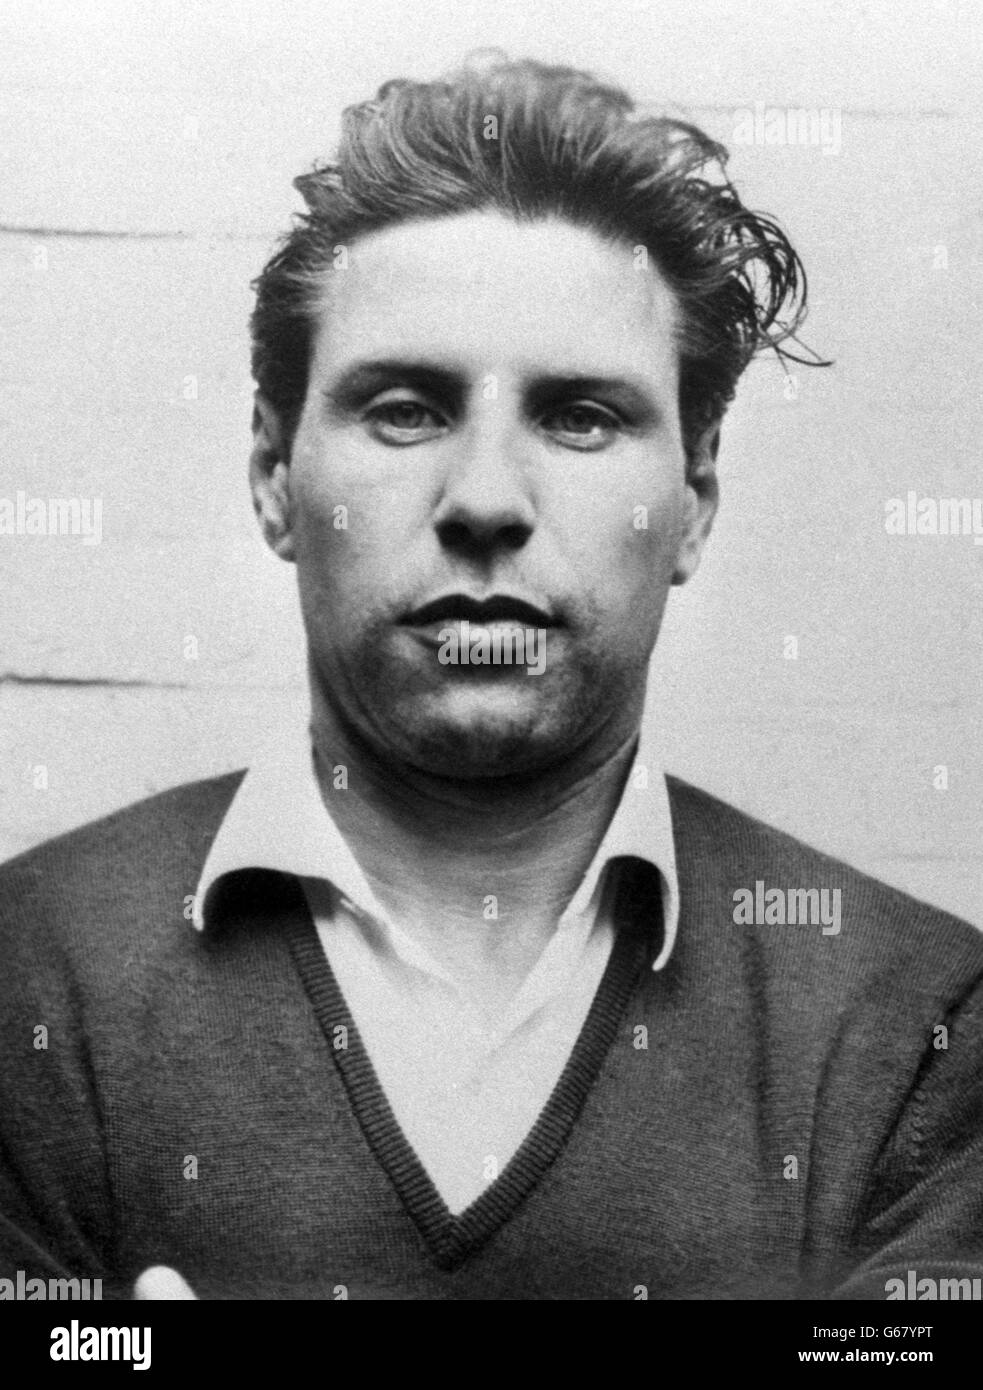 Charles Wilson, one of the men involved in the 1963 Great Train Robbery, was shot dead in Marbella, Spain. Stock Photo